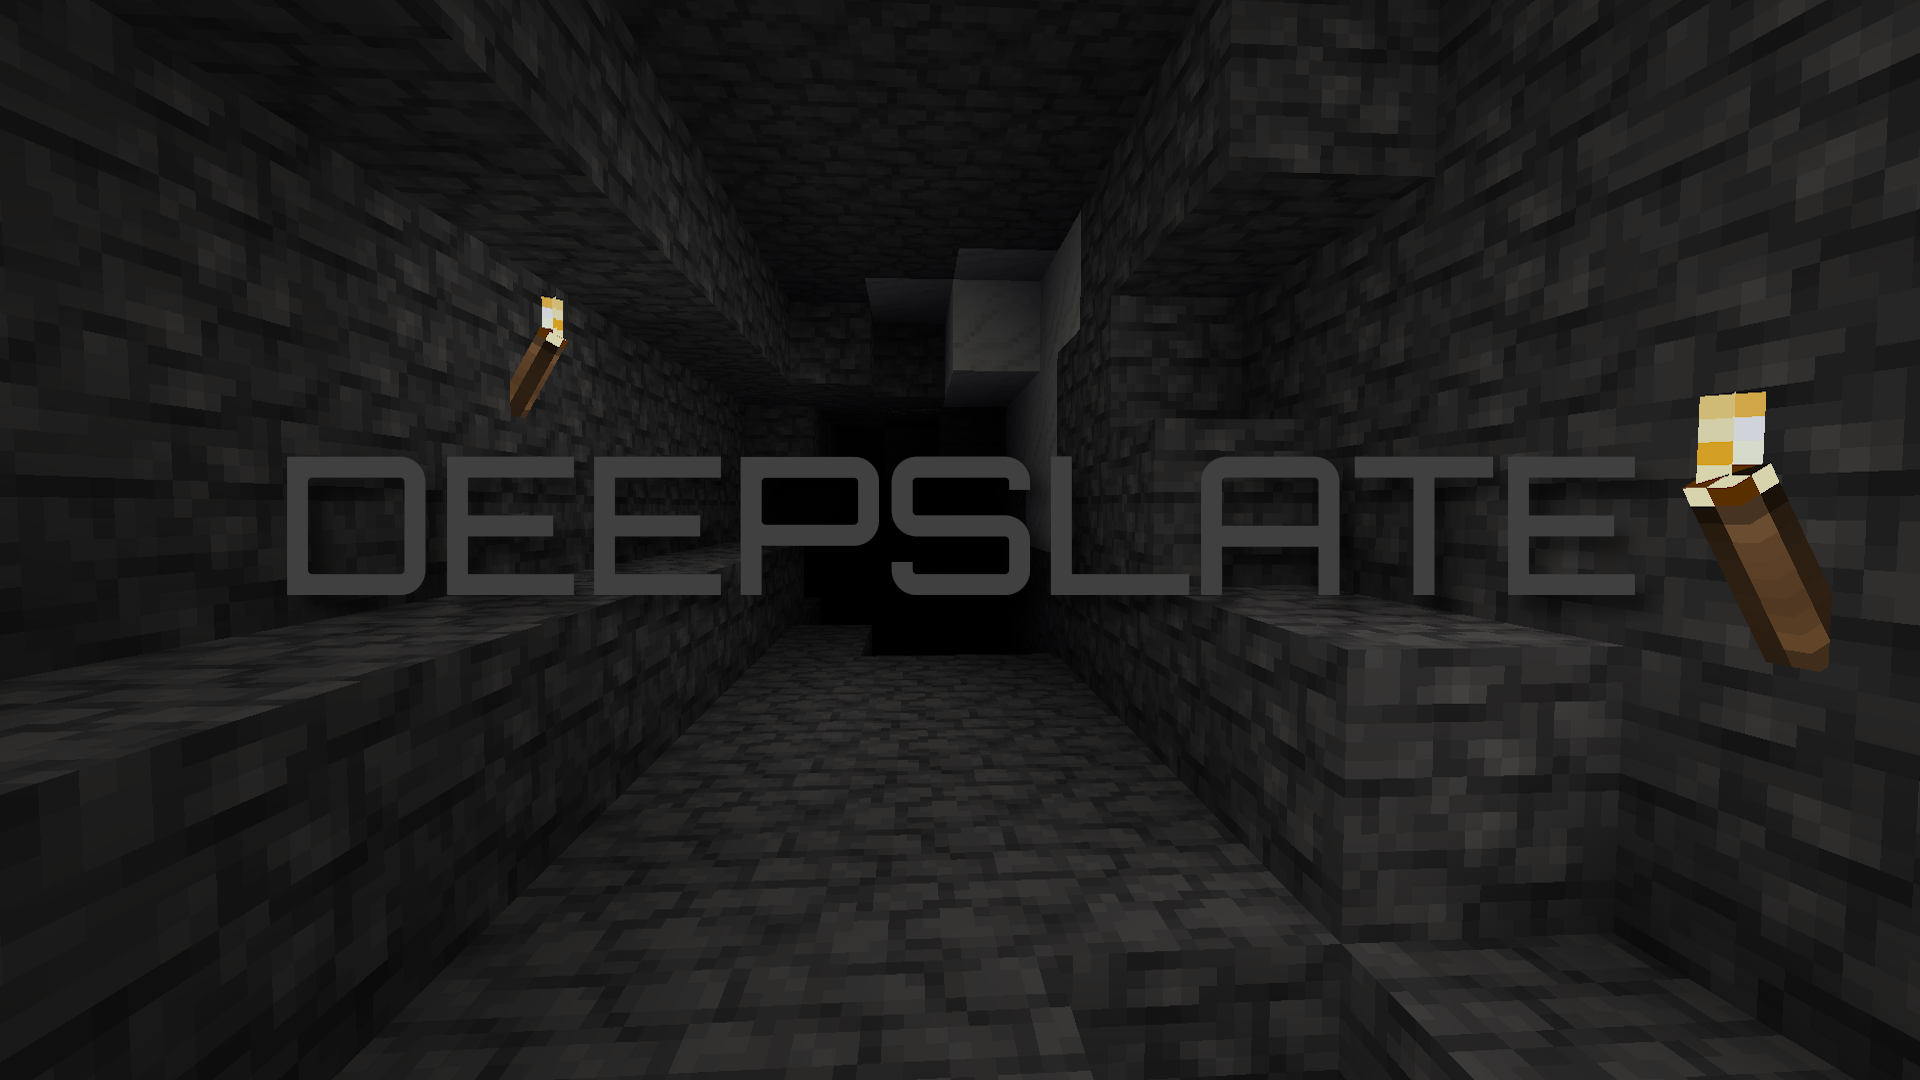 The word ‘deepslate’ in front of a dark deepslate cave